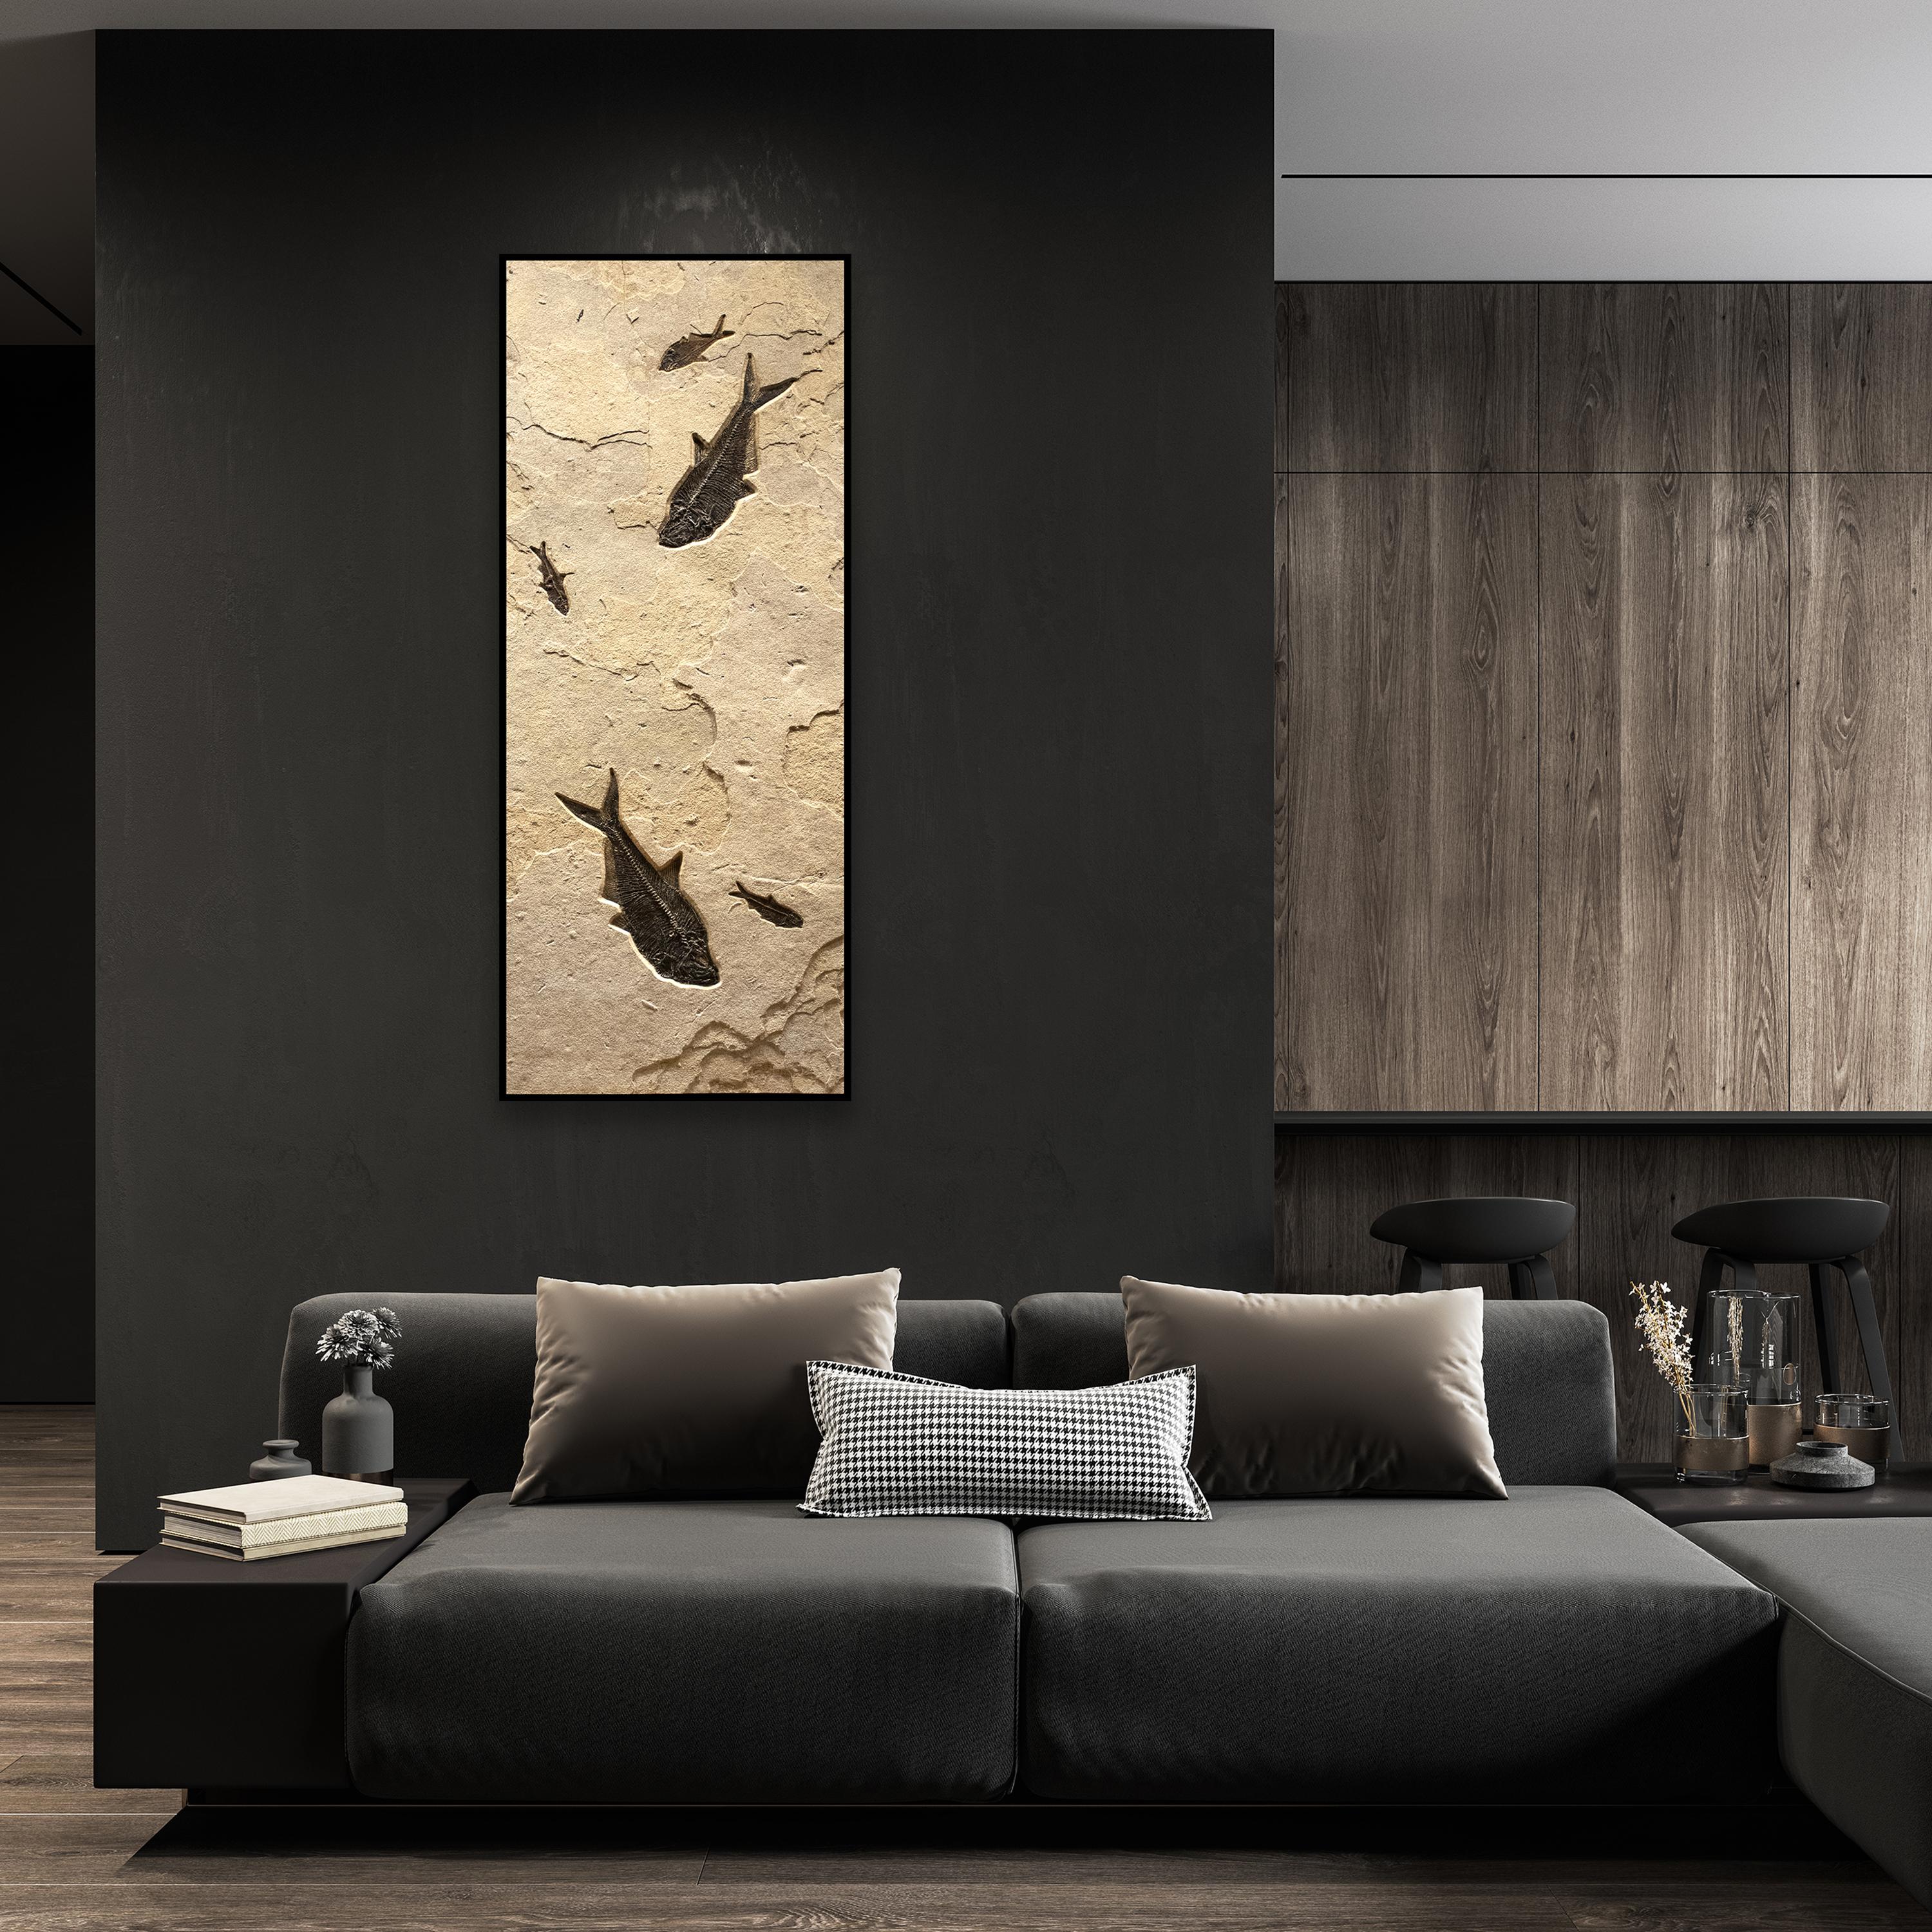 This unique fossil mural features three Diplomystus dentatus and two Knightia eocaena, all of which are Eocene era fossils dating back about 50 million years. This grouping of ancient fish swims in a beautifully textured matrix of natural,